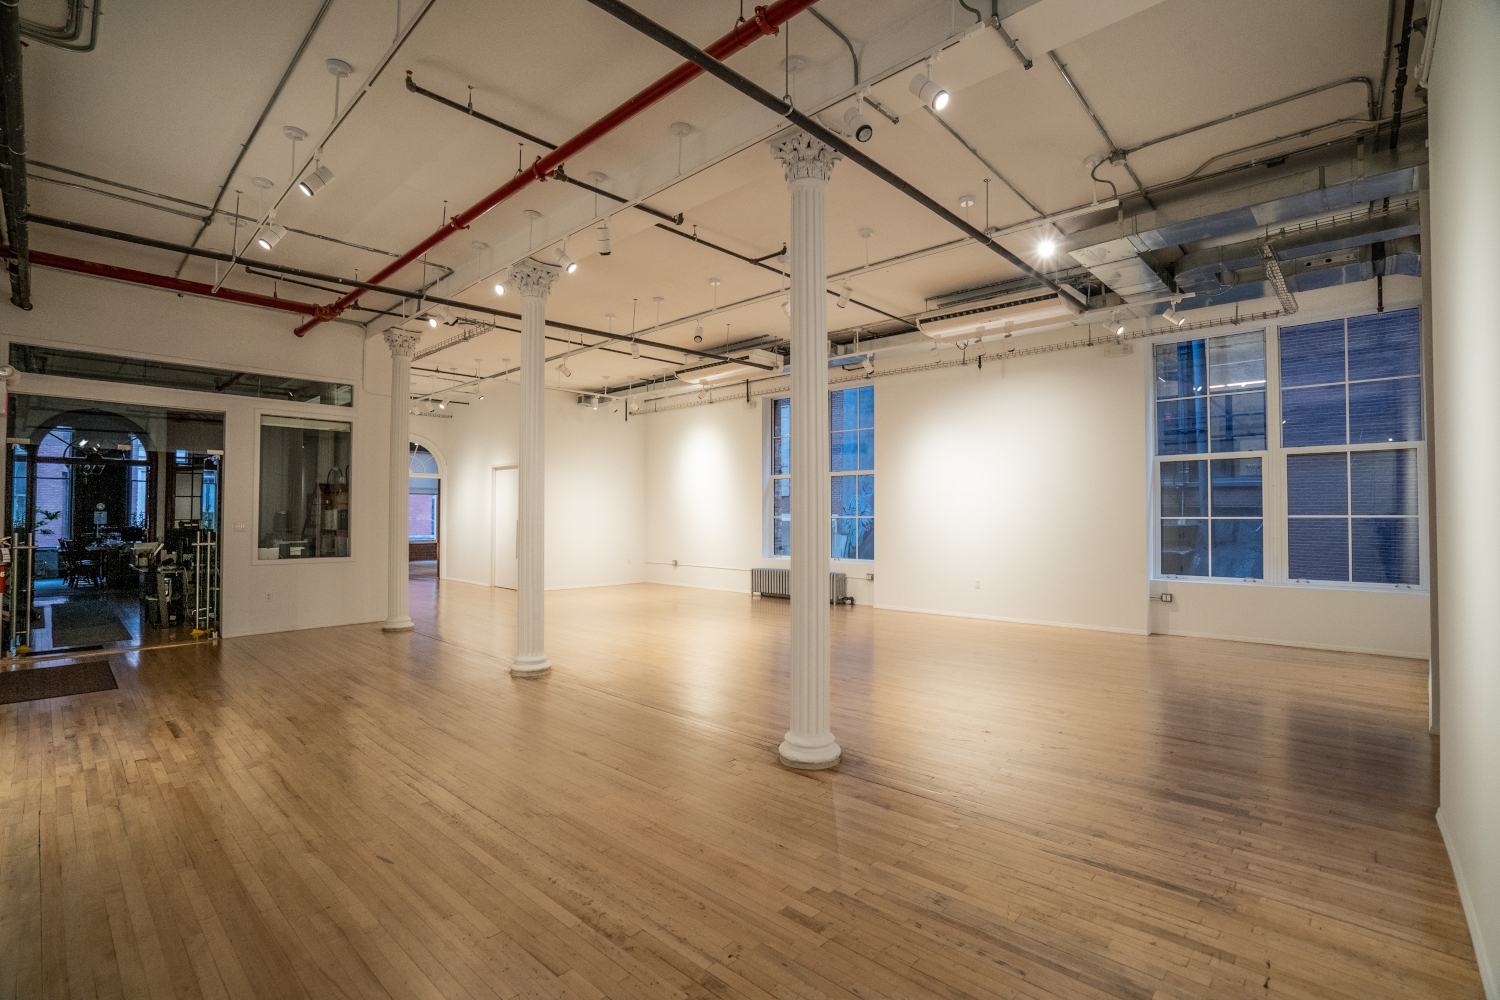 Inside view of 80 White Street displaying the restored steel columns, freshly refinished wood floors, and newly installed gypsum partitions. The image highlights the interior finishes, such as painting, new lighting, sprinkler systems, elevator door trims, windows, fire alarm, ductwork, and steel hollow metal doors.